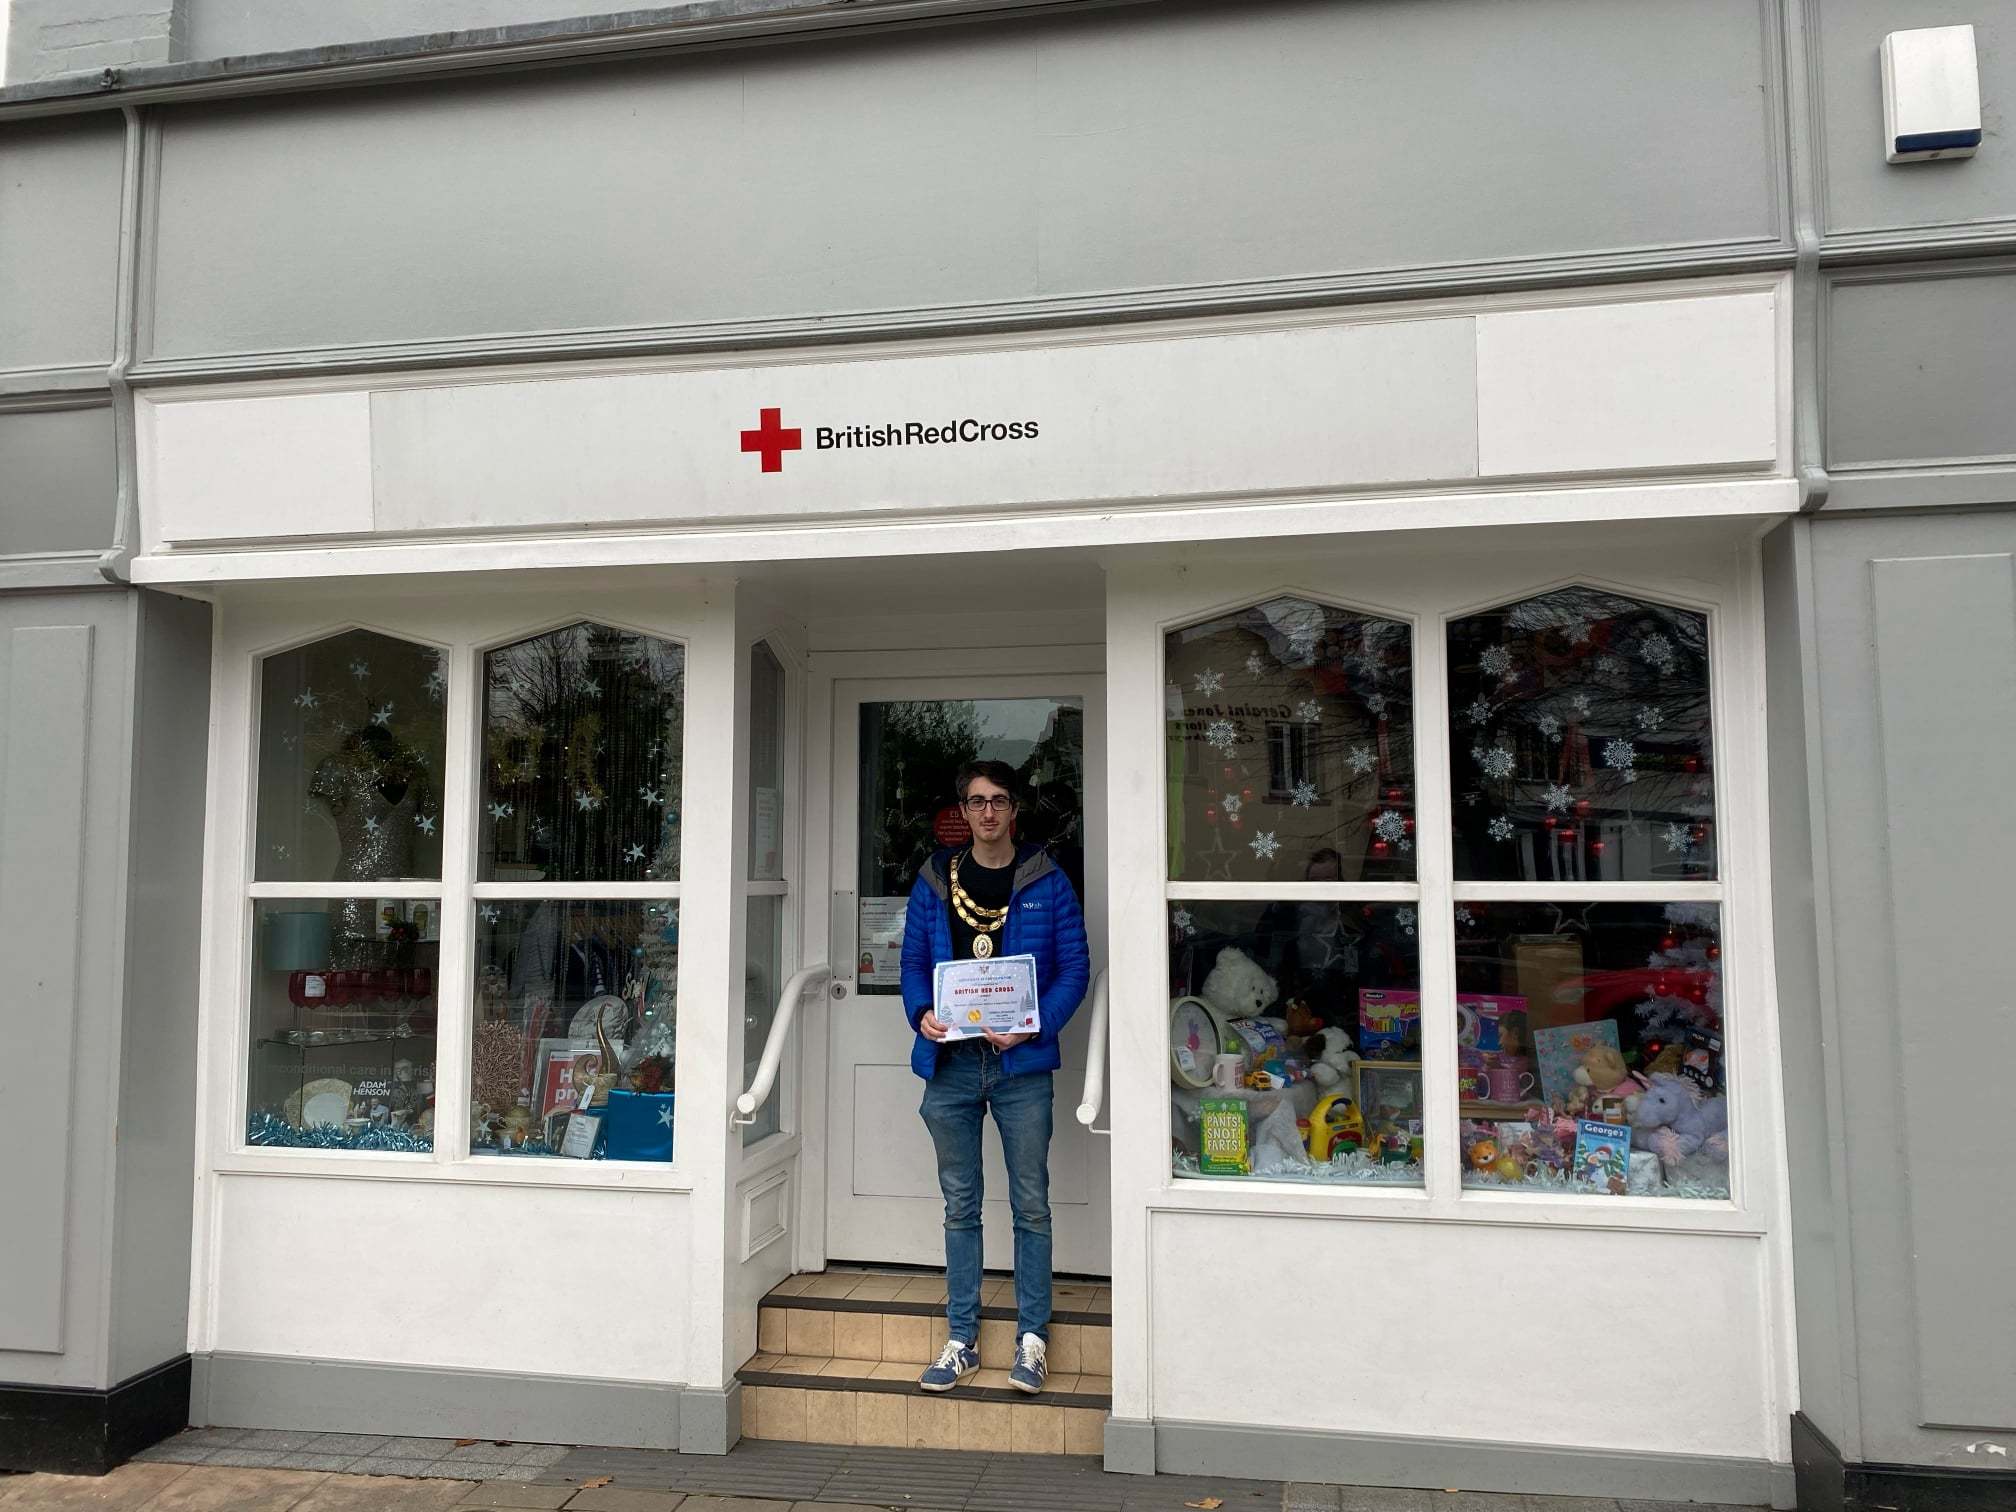 British Red Cross shop won the Newtown Christmas Window Display competition 2021